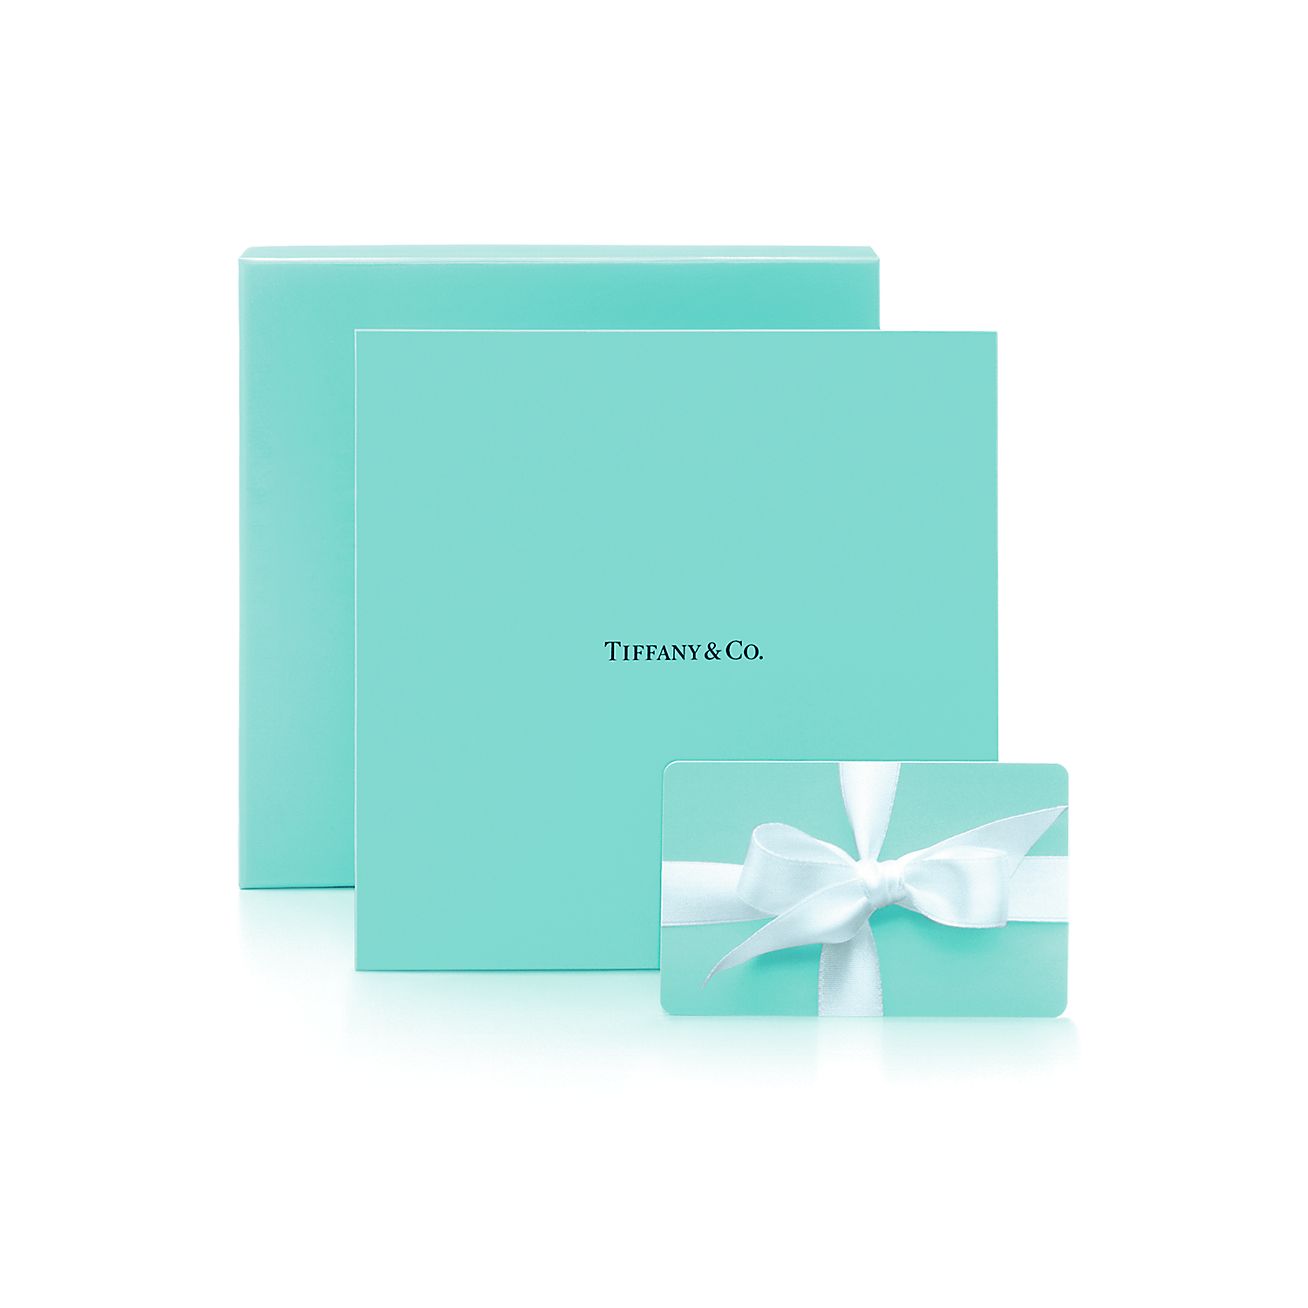 Tiffany & Co. Collection 12] Gift ideas? 😍 📷 by